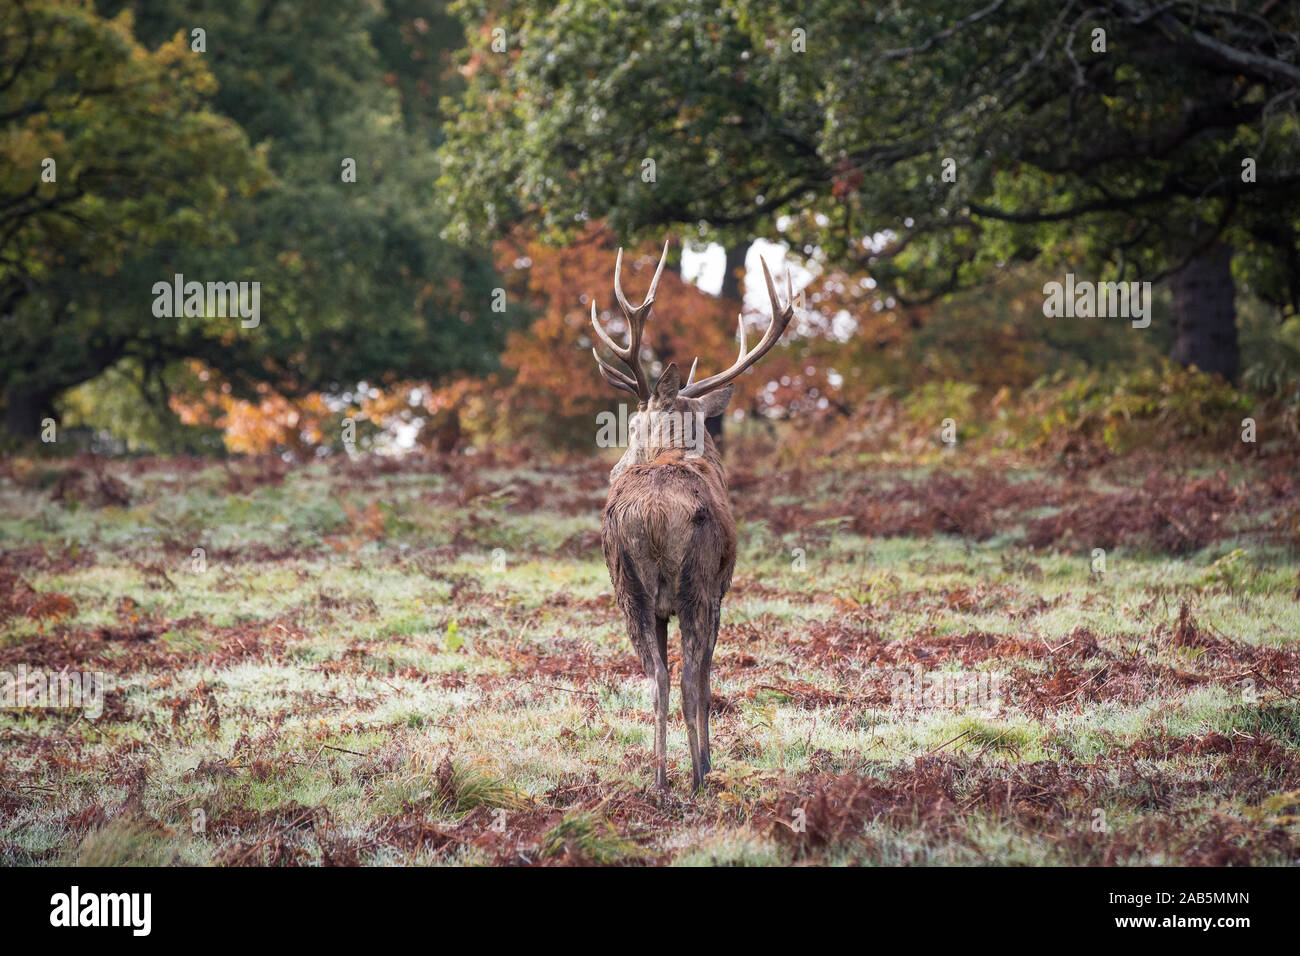 Deer walking away in Richmond Park, surrounded by Autumnal trees Stock Photo